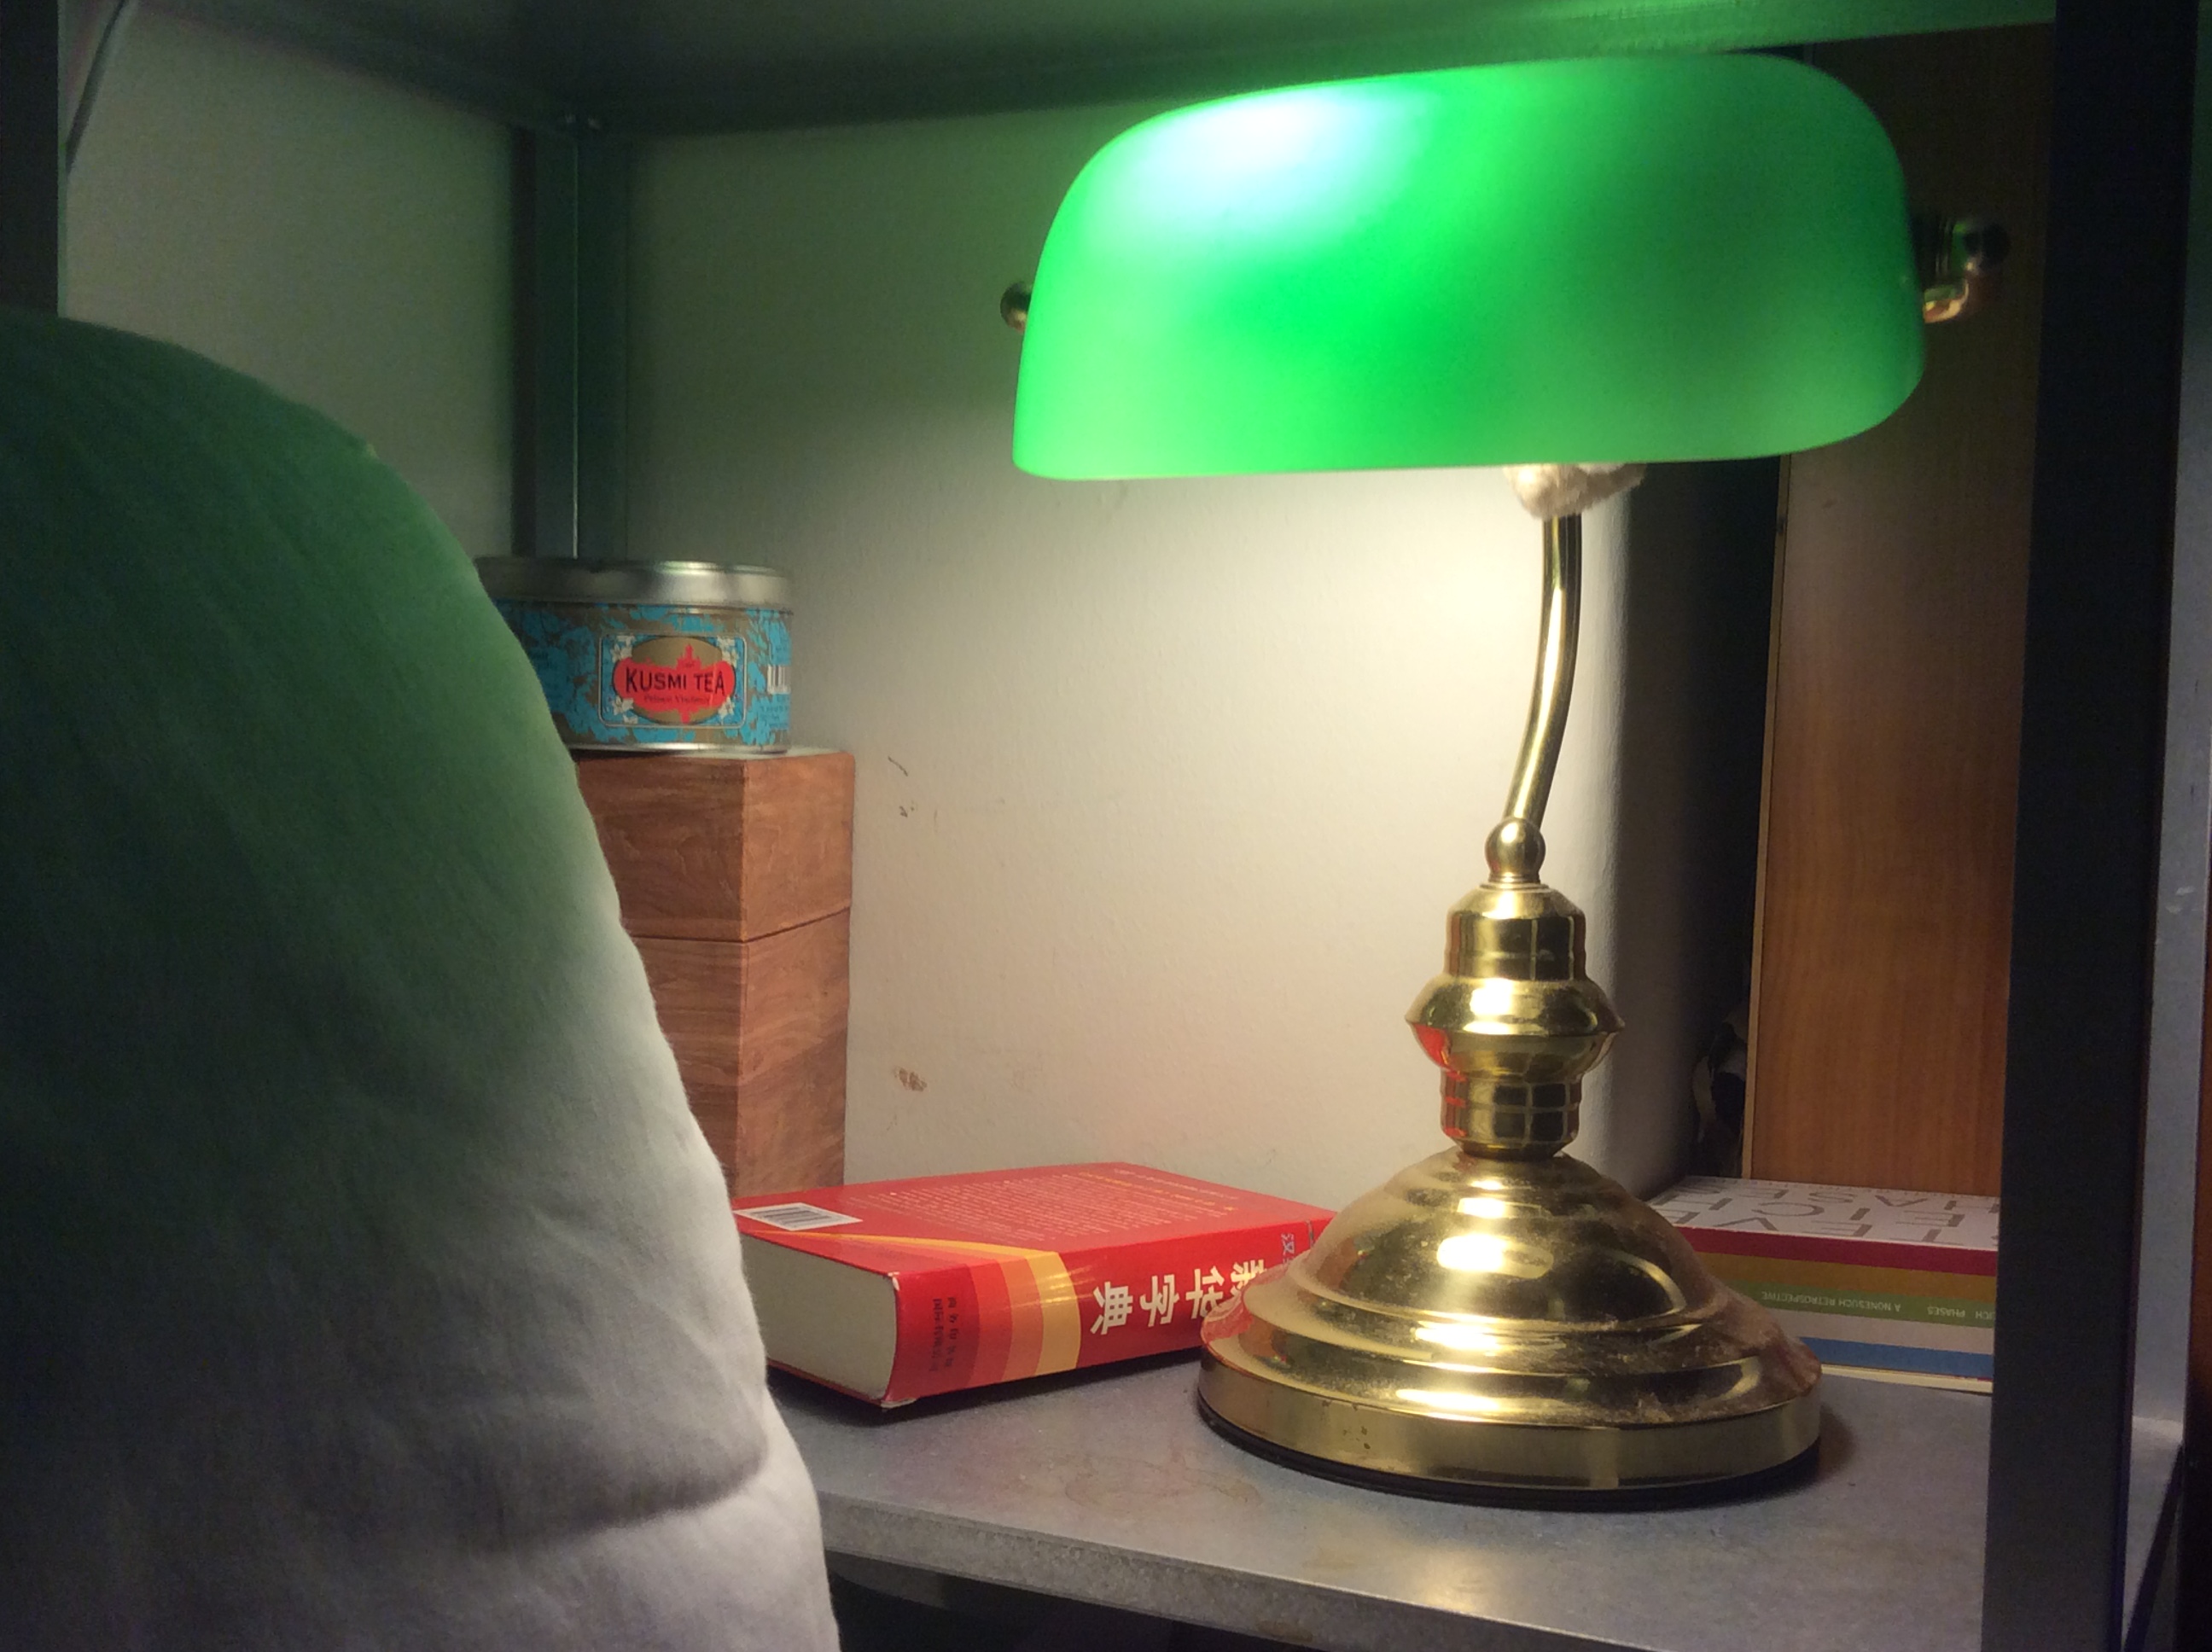 The green banker's lamp